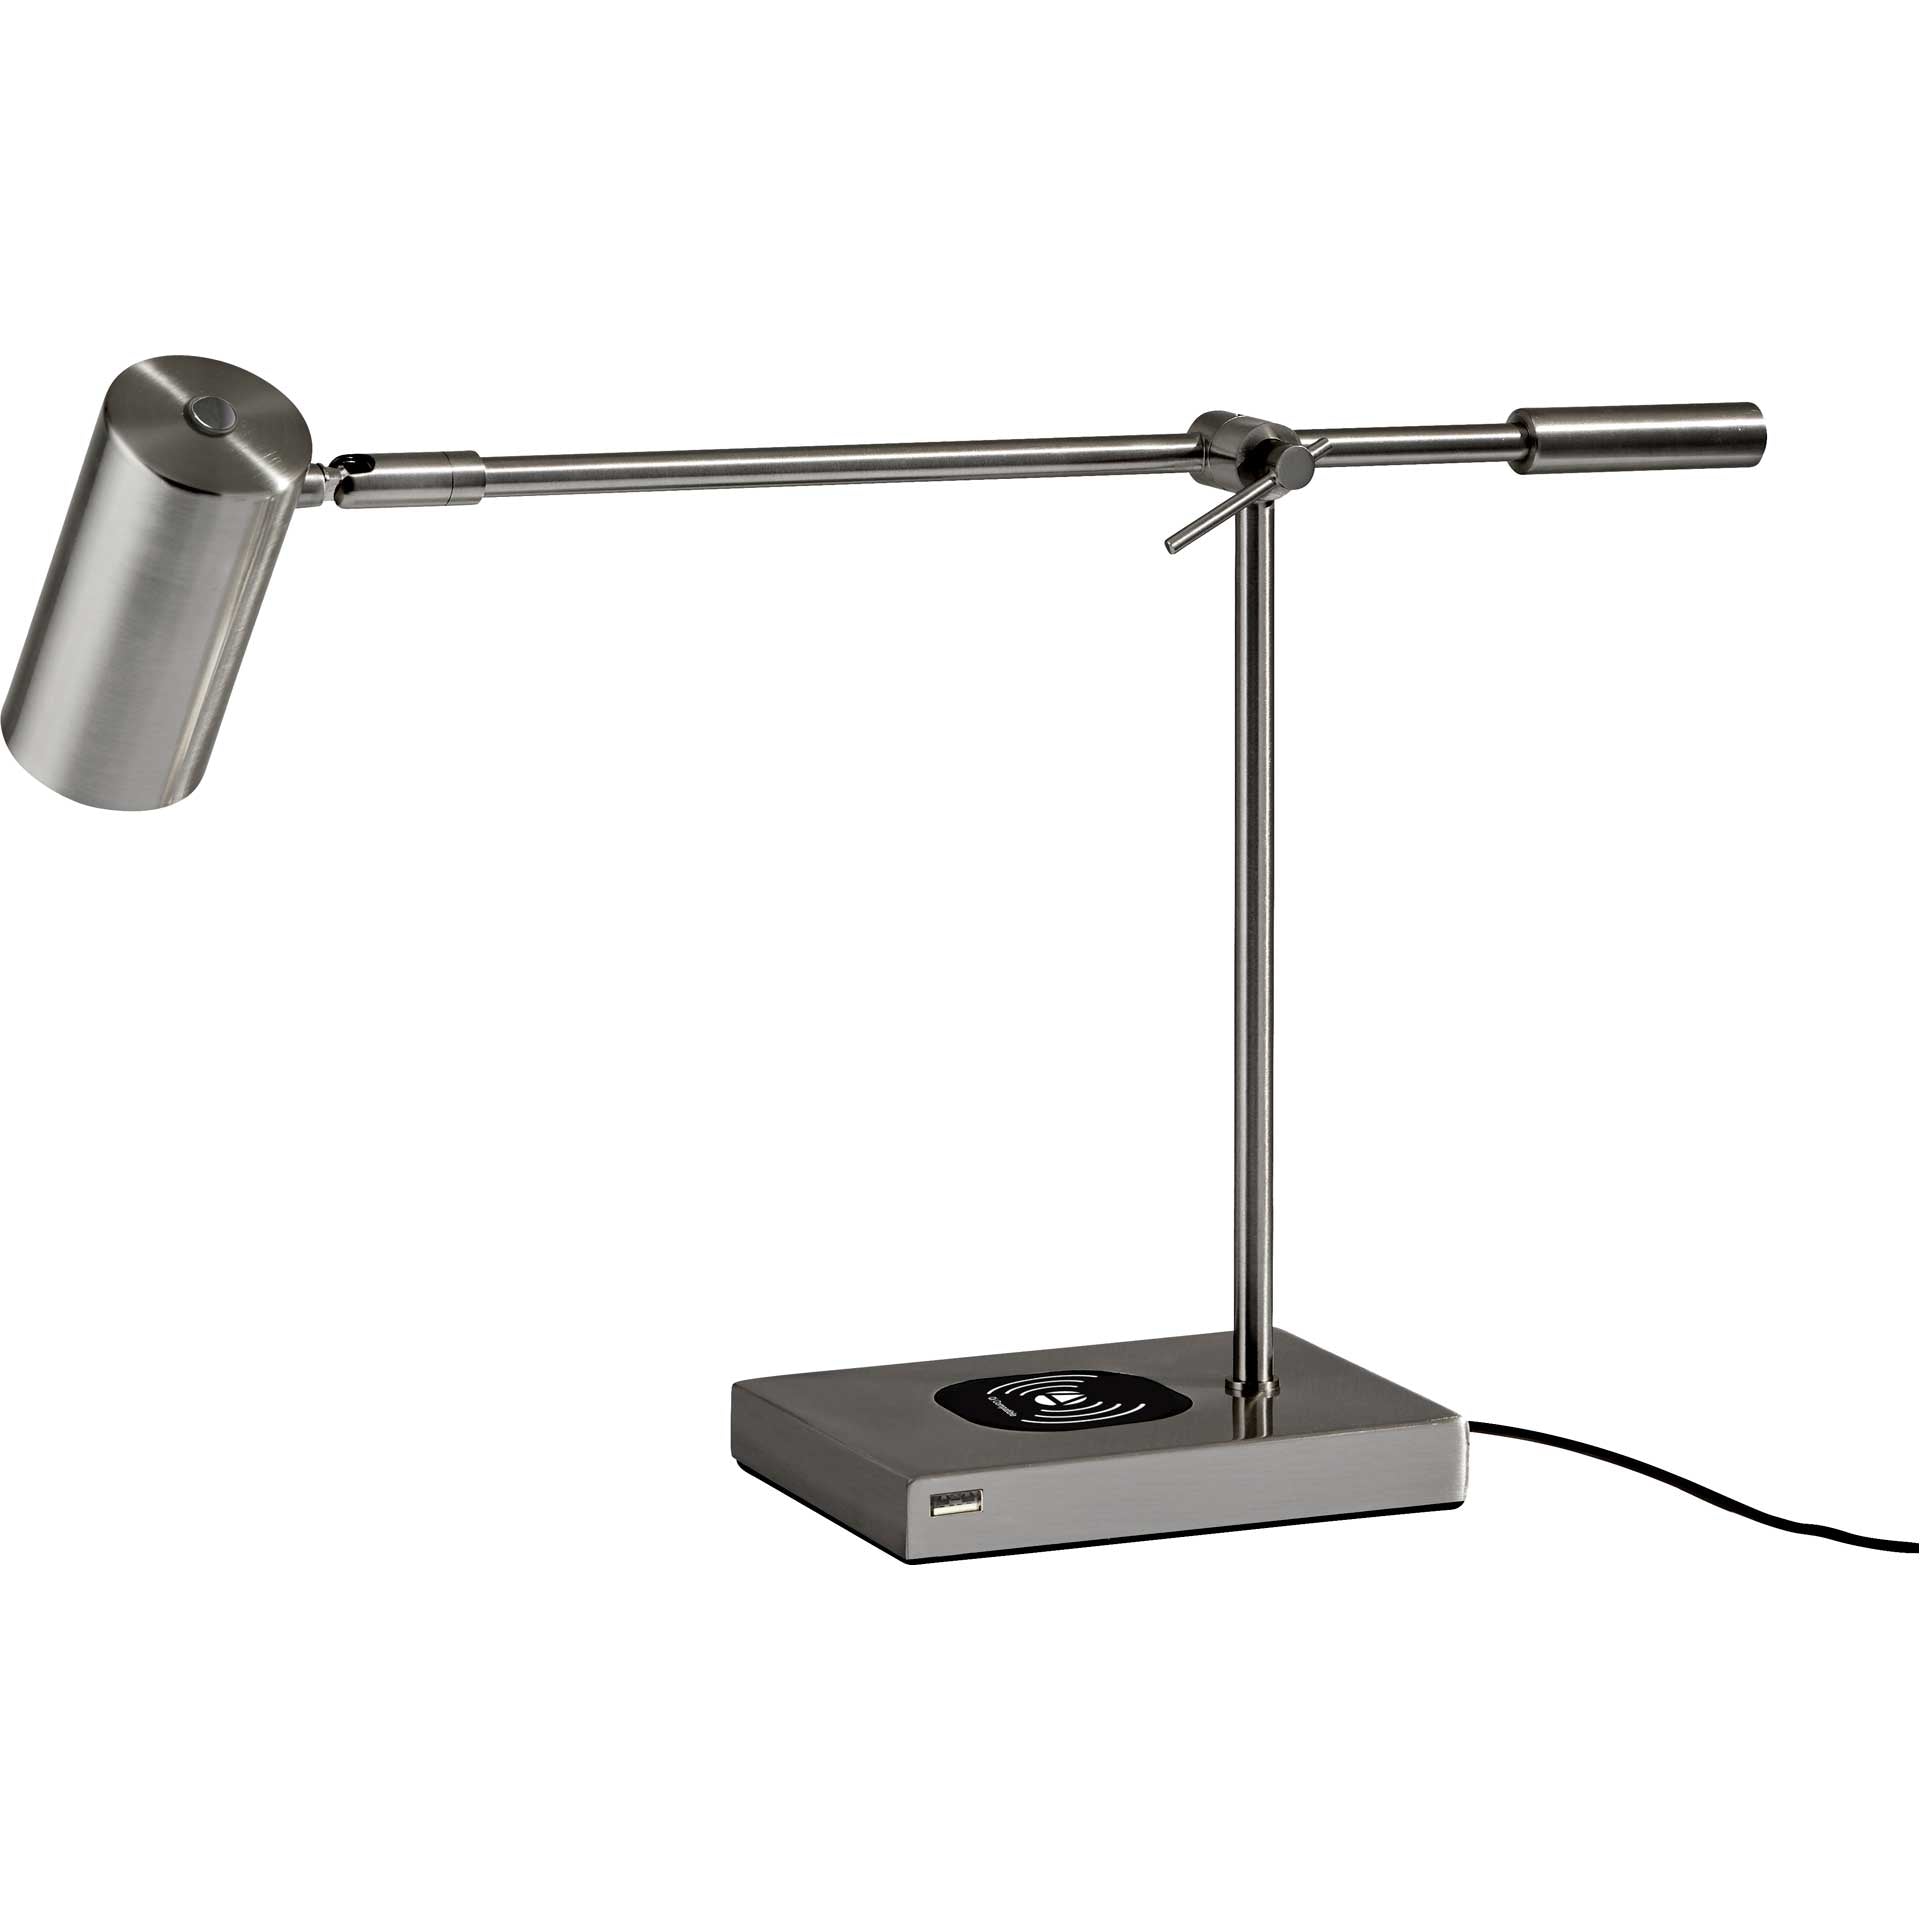 Colombes Wireless Charge Desk Lamp Brushed Steel